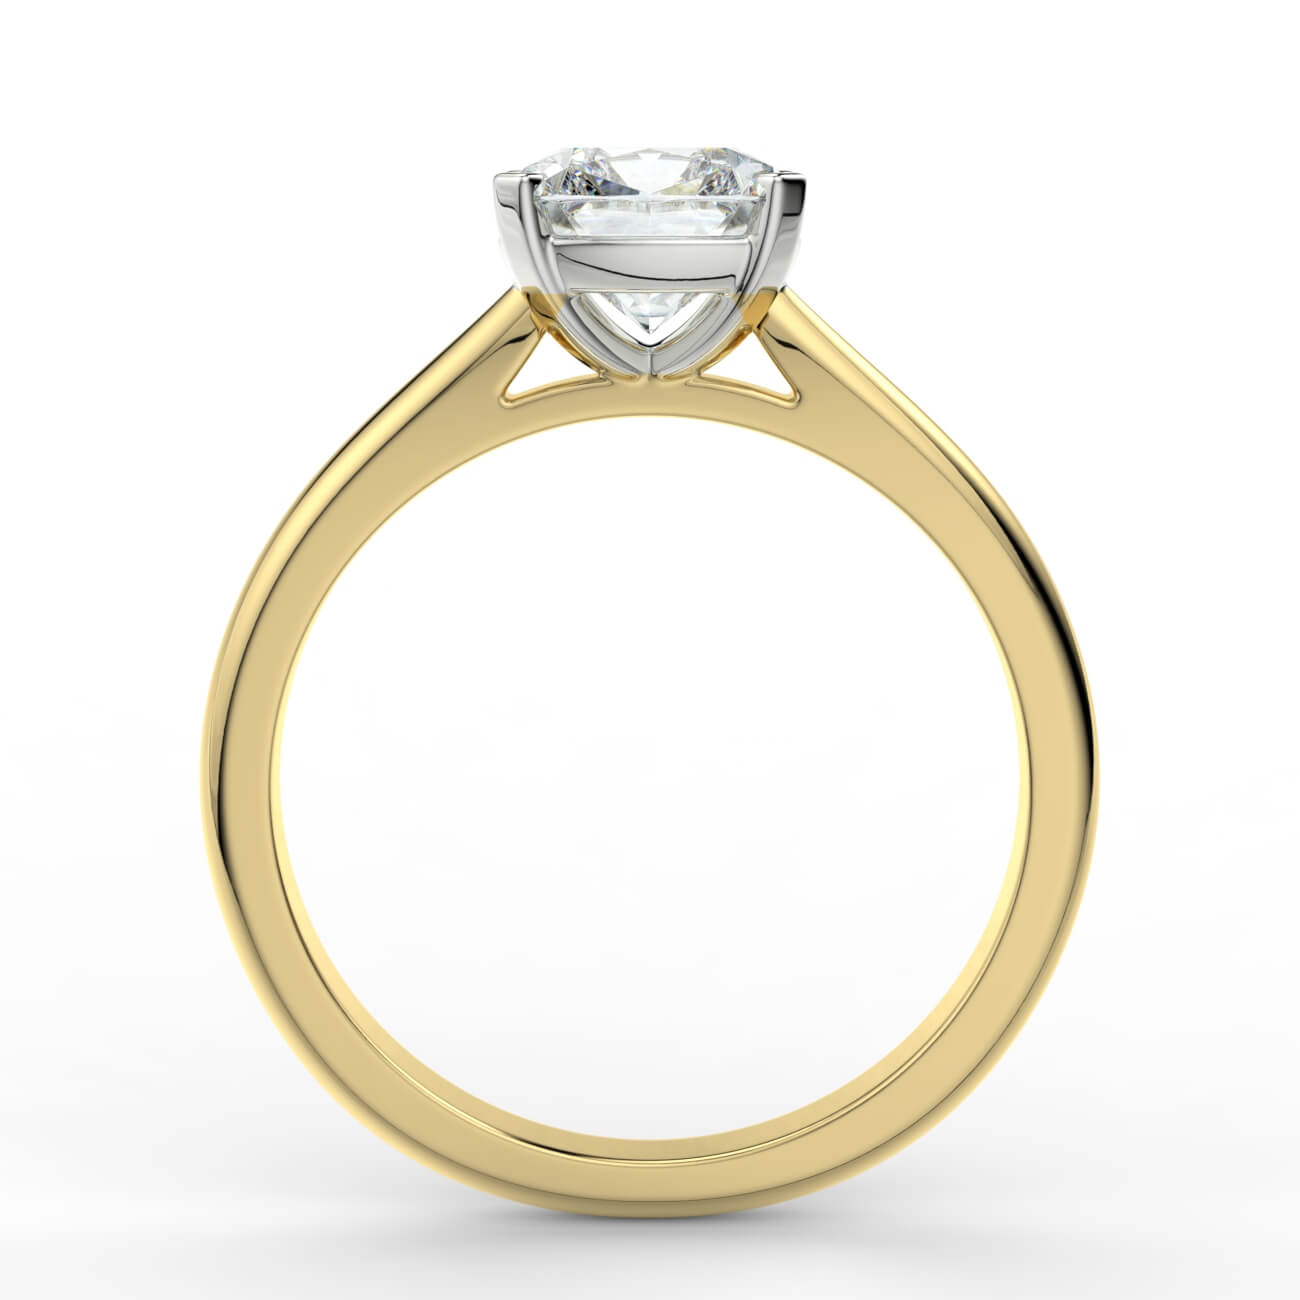 Cushion cut diamond cathedral engagement ring in yellow and white gold – Australian Diamond Network